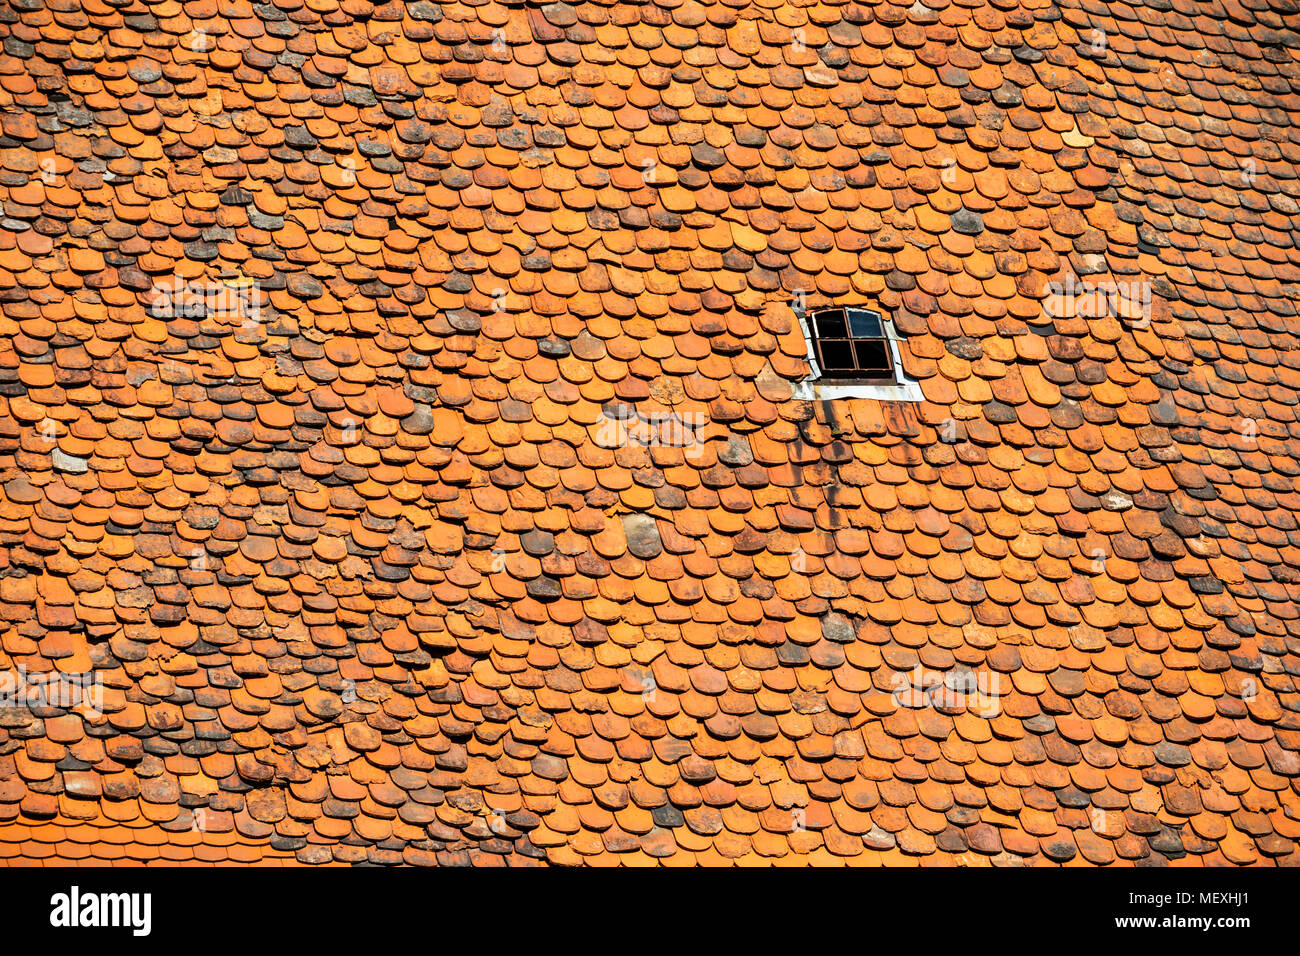 housetop with historic beaver-tail roofing tiles in Büdingen, Hesse, Germany, Europe Stock Photo